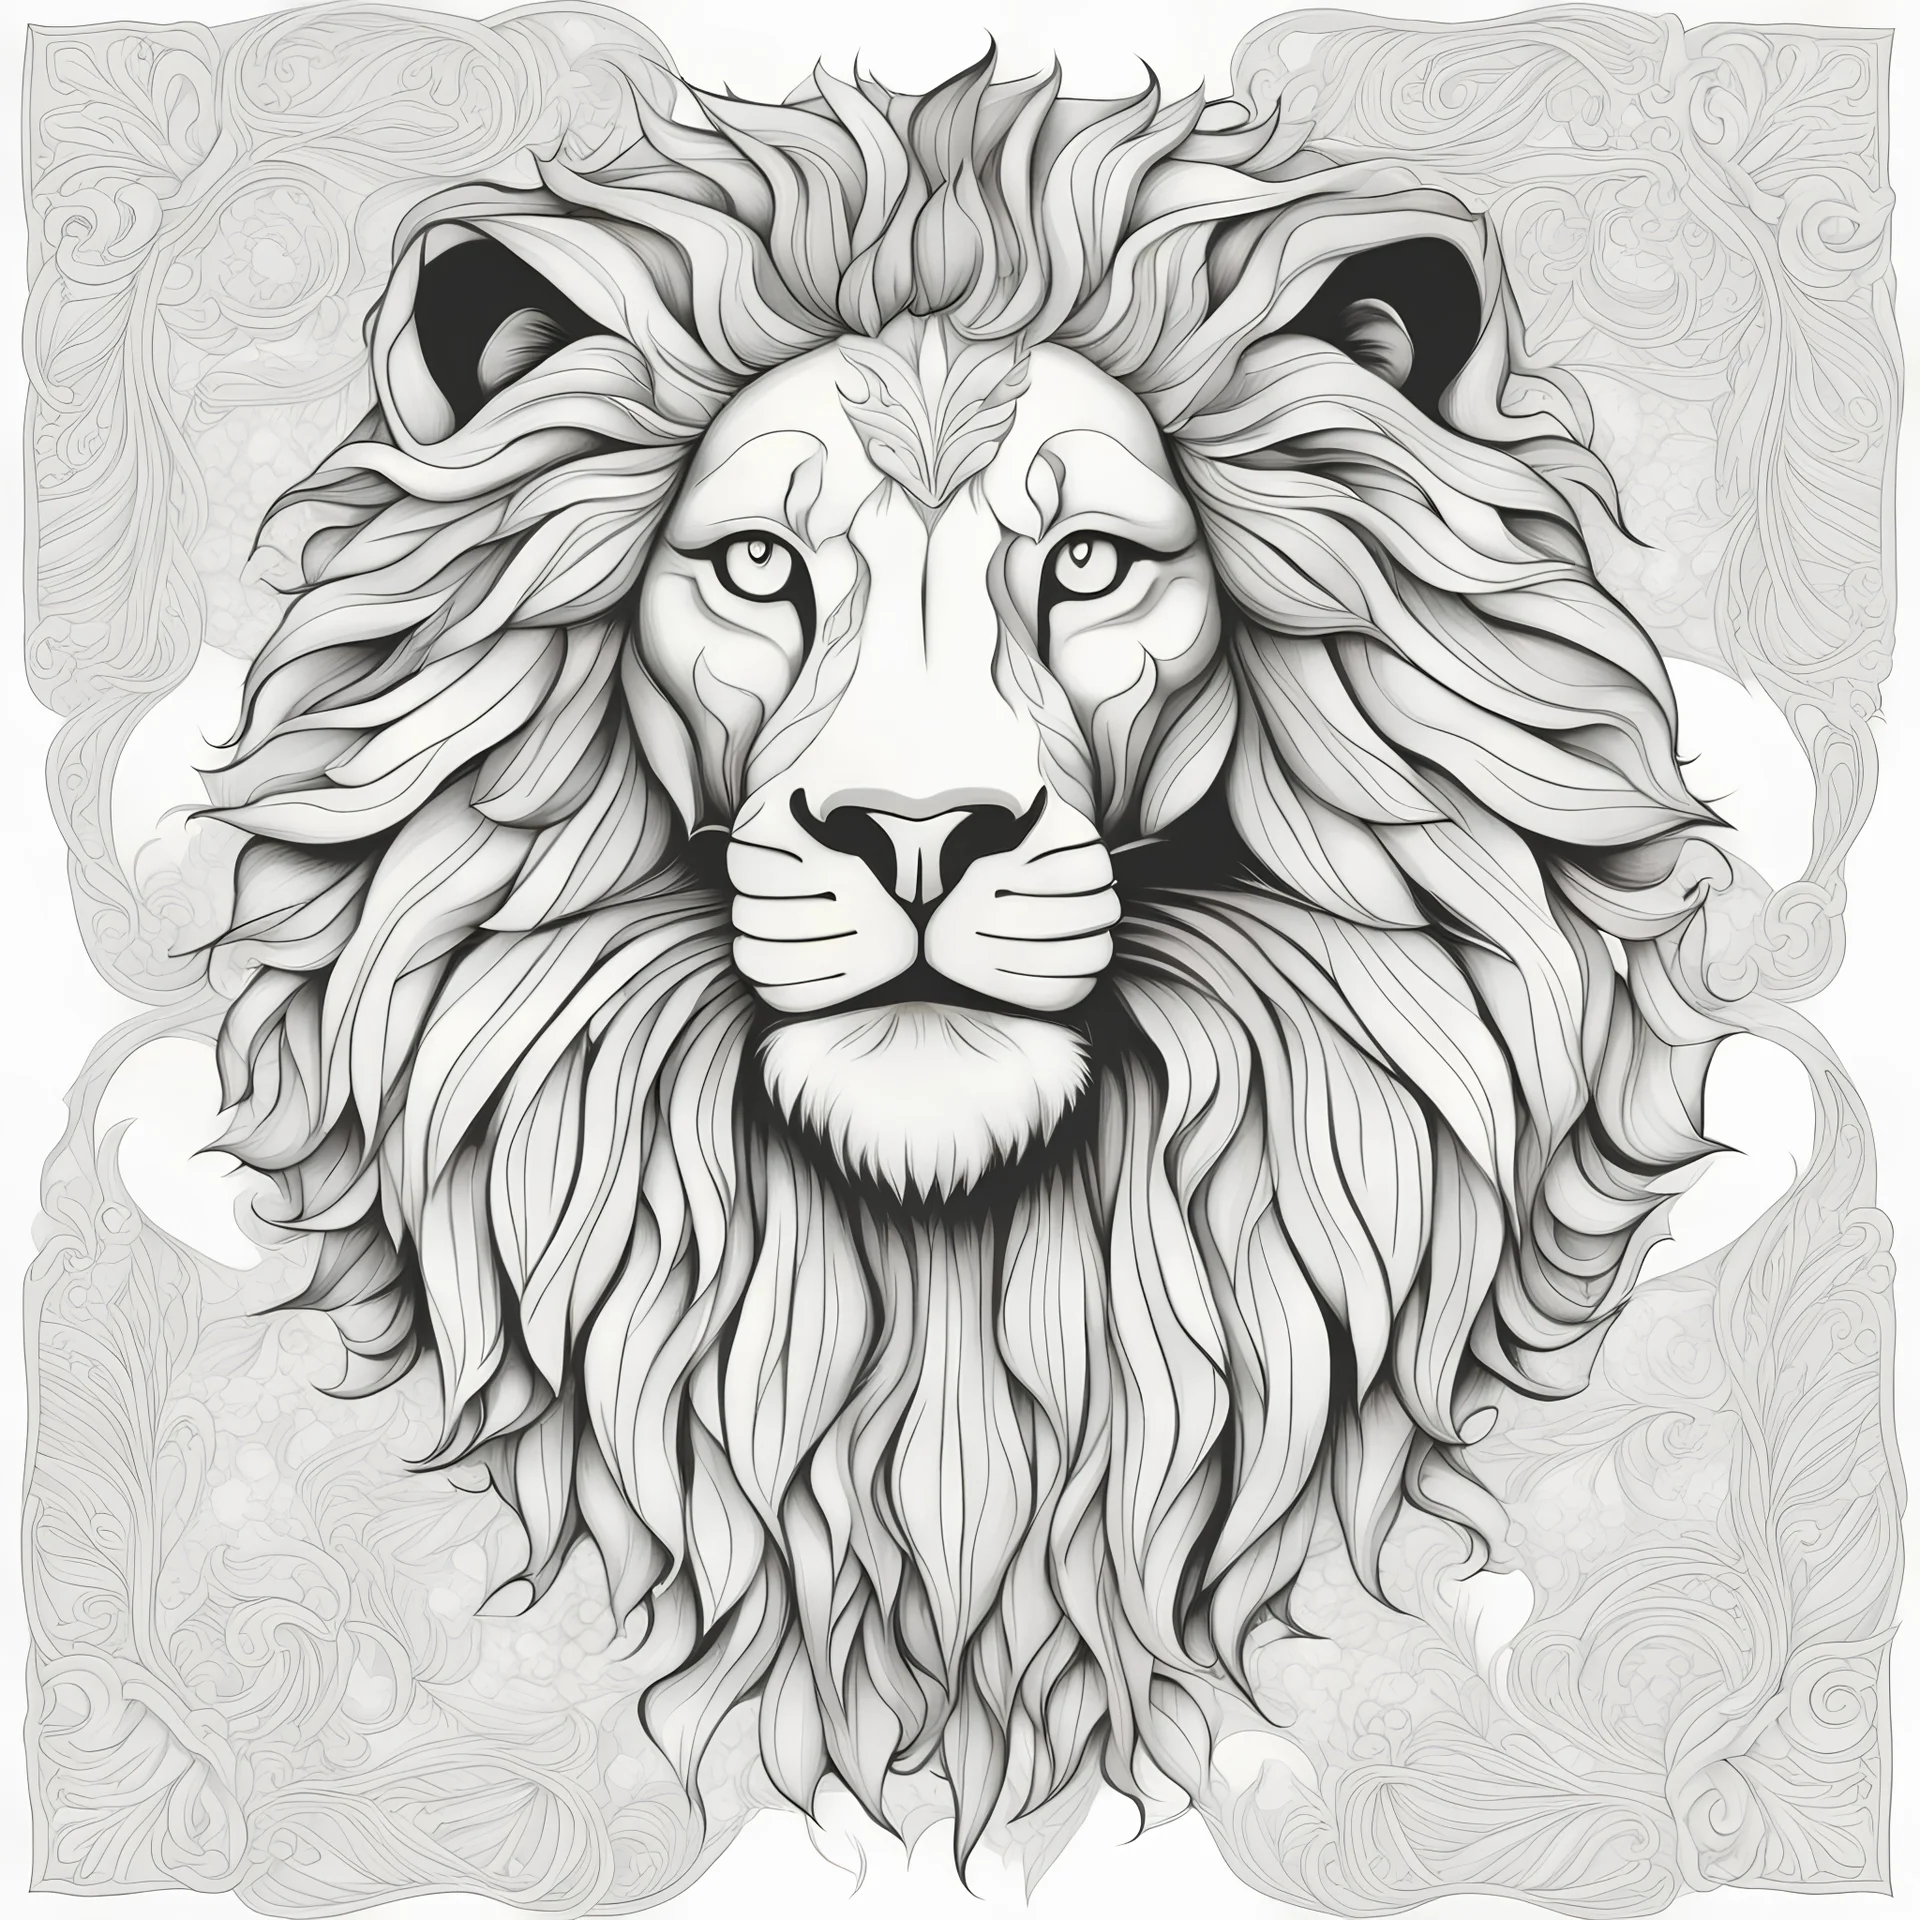 Lion. Outline and patterned. By Elen Lane | TheHungryJPEG